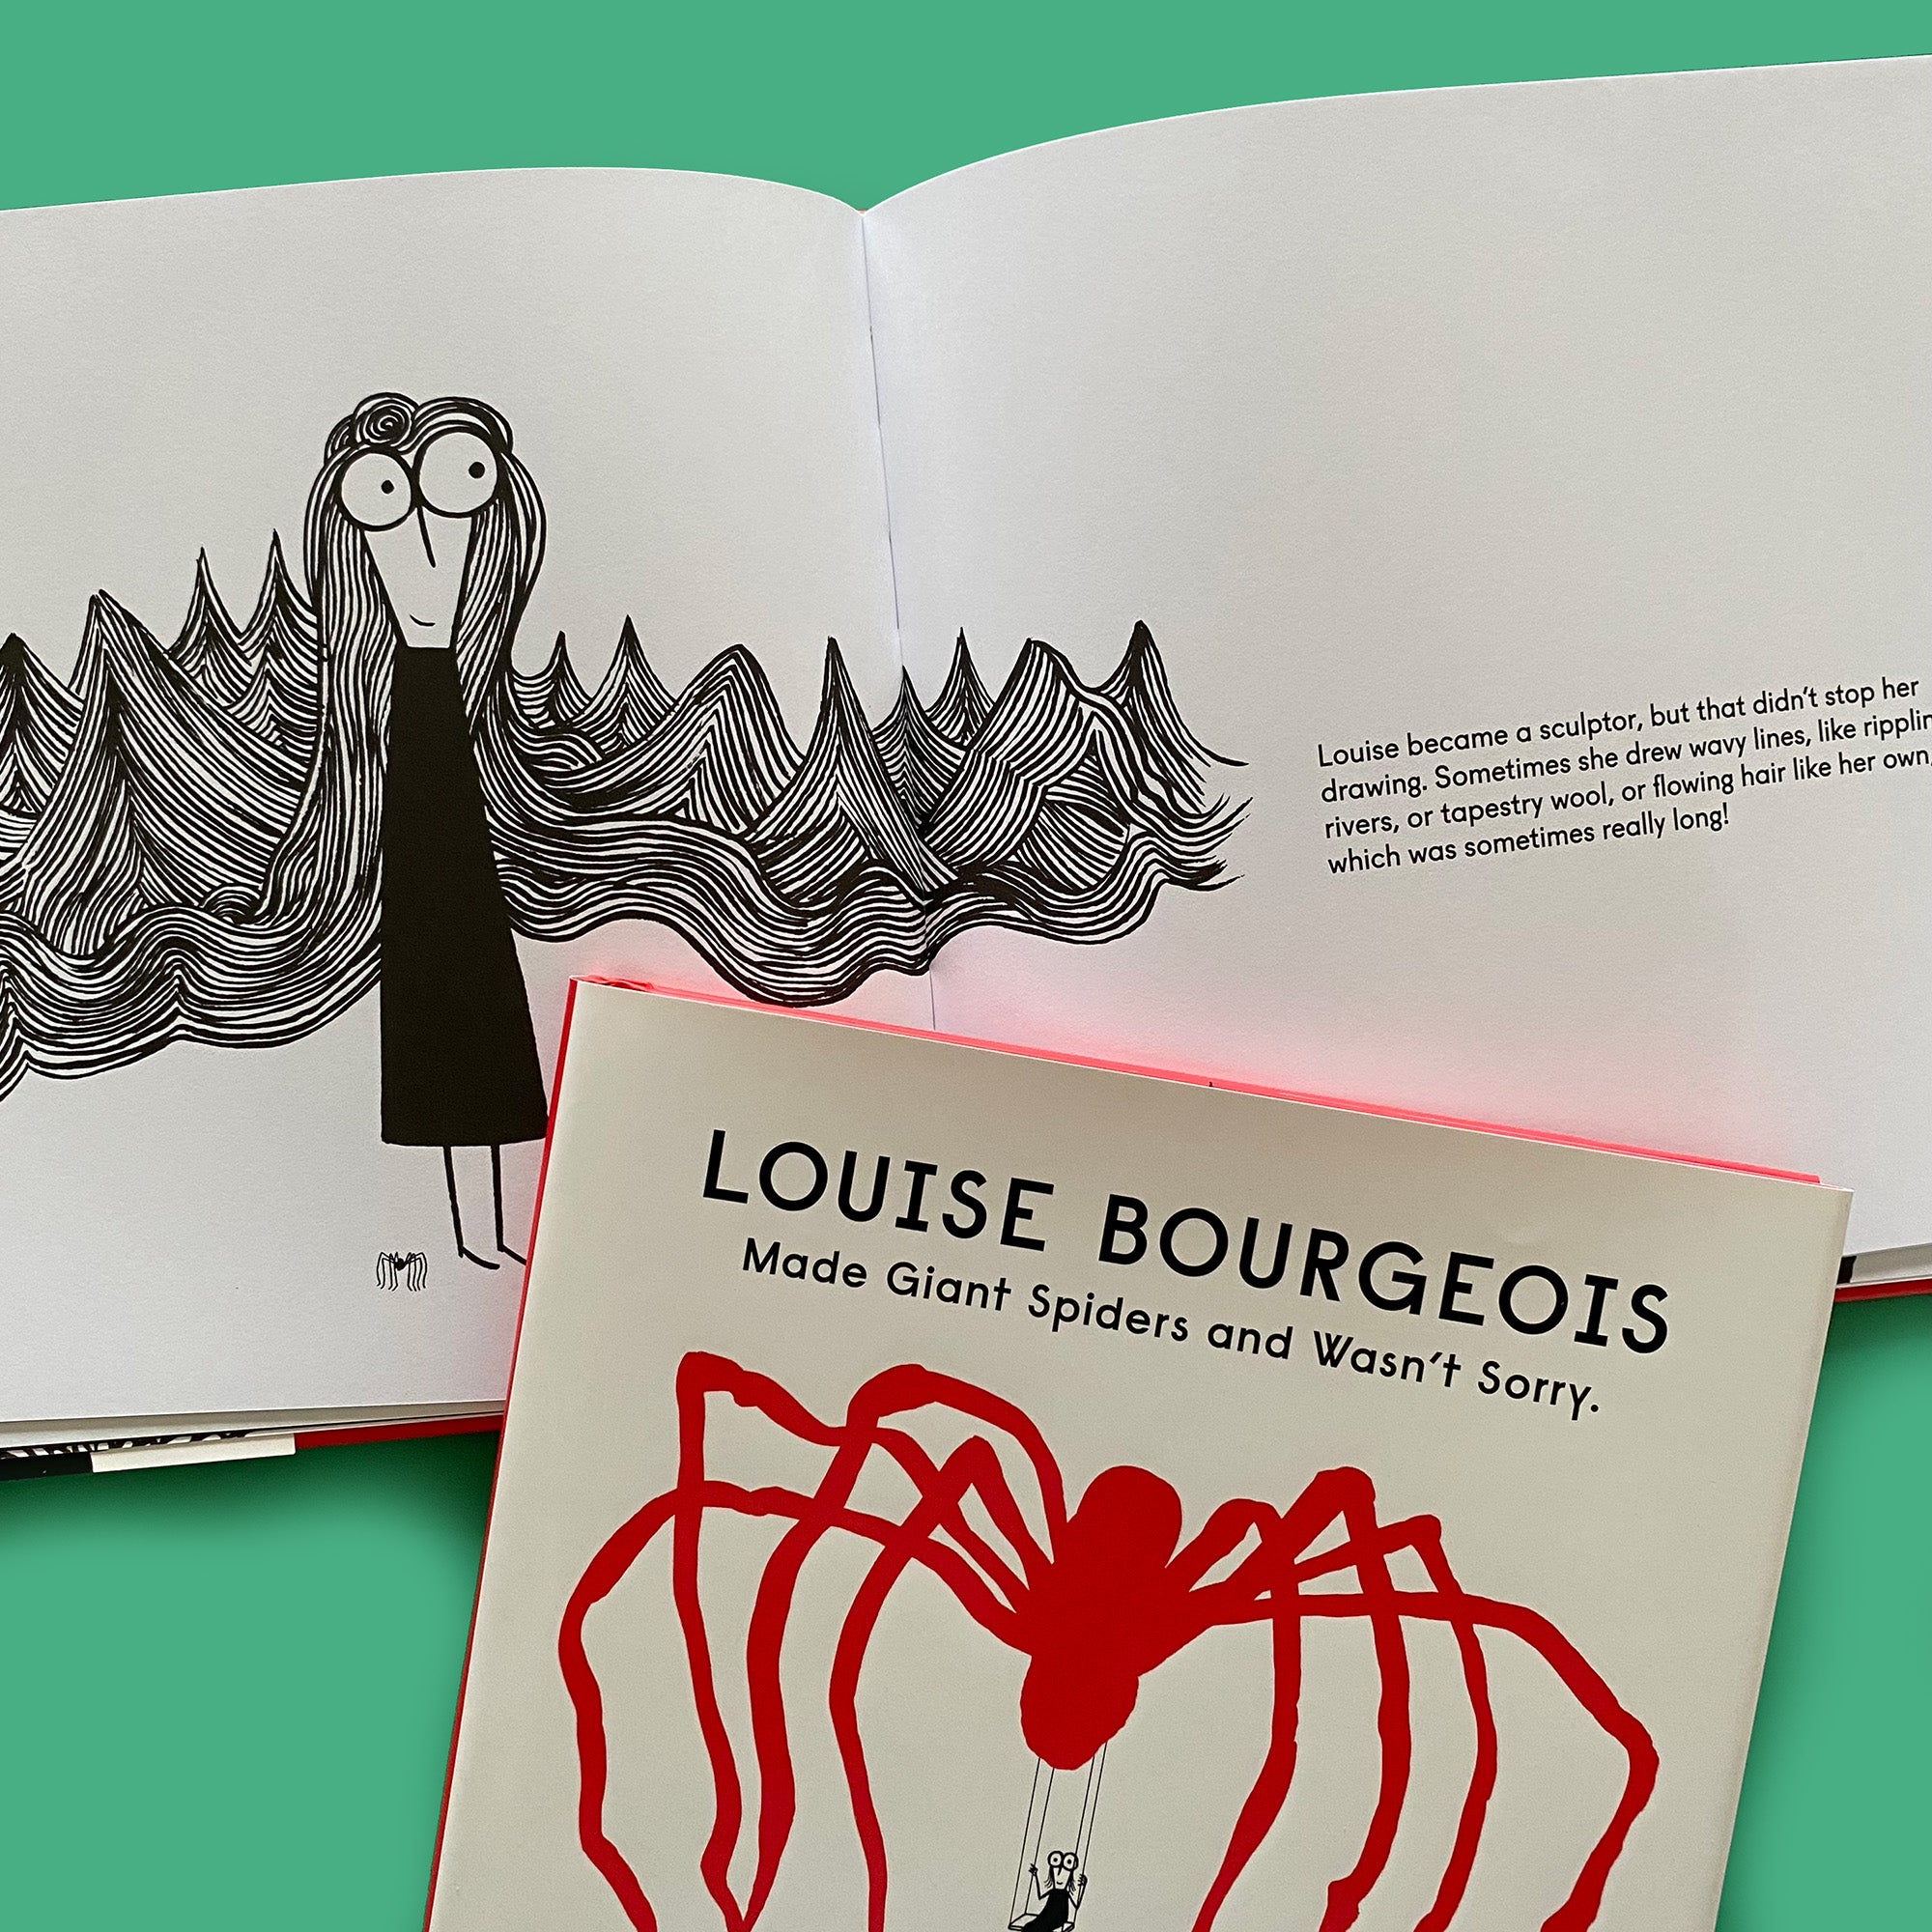 Phaidon Press Louise Bourgeois Made Giant Spiders and Wasn't Sorry Book  by Fausto Gilberti